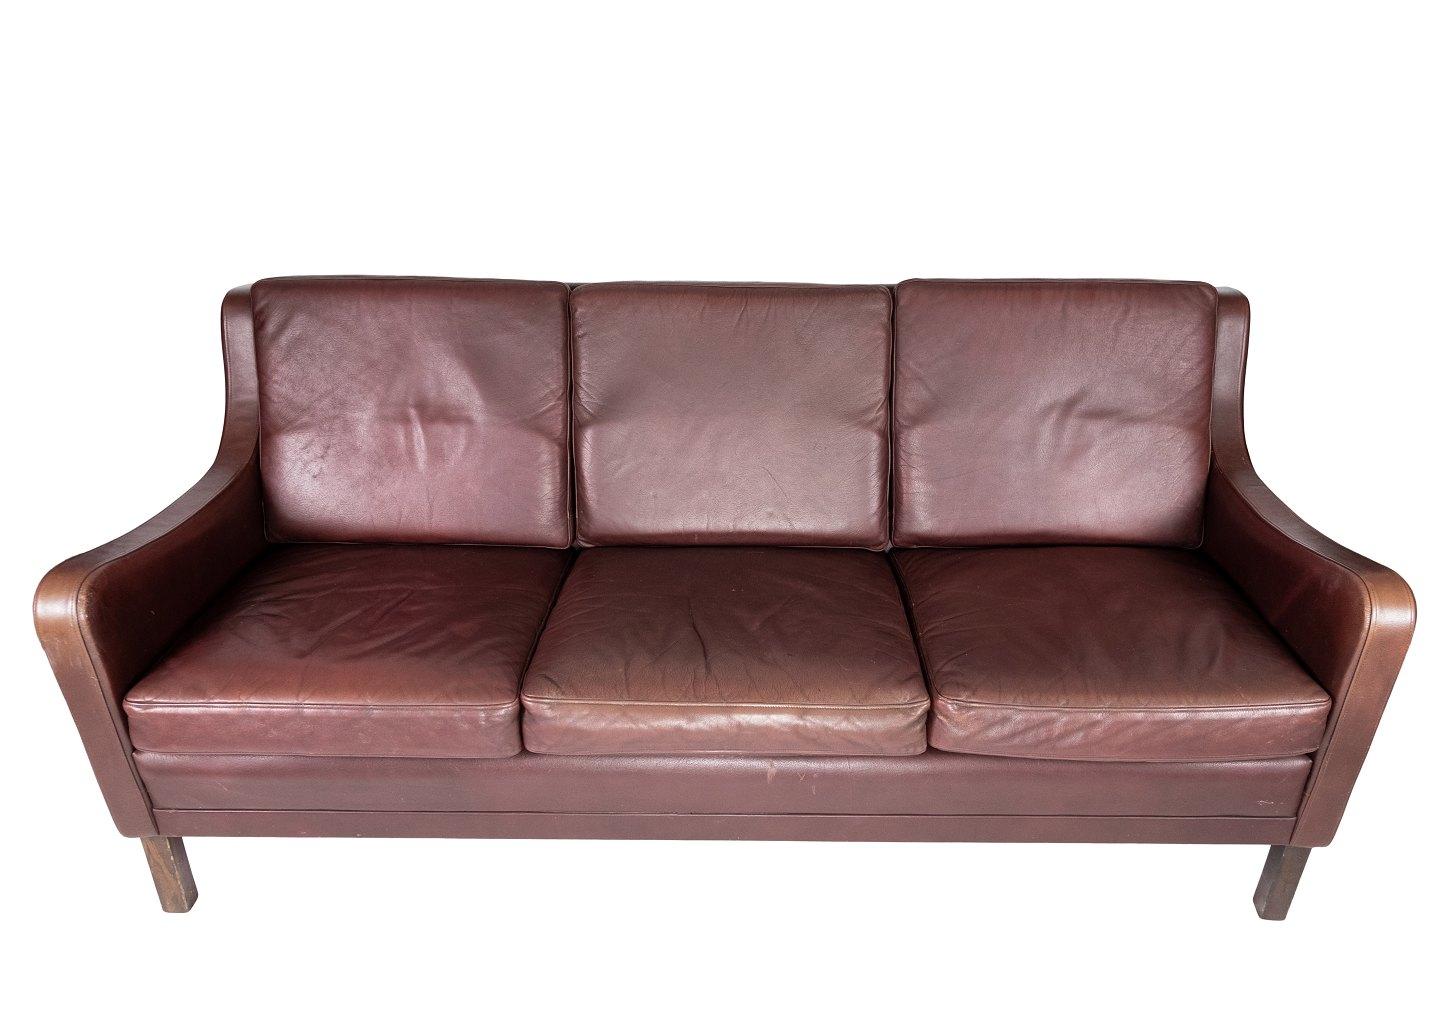 The three-seater sofa in red-brown leather from Stouby Møbler, produced in the 1960s, exudes timeless elegance and comfort. Stouby Møbler, a renowned Danish furniture company, is known for its high quality craftsmanship and timeless designs, and